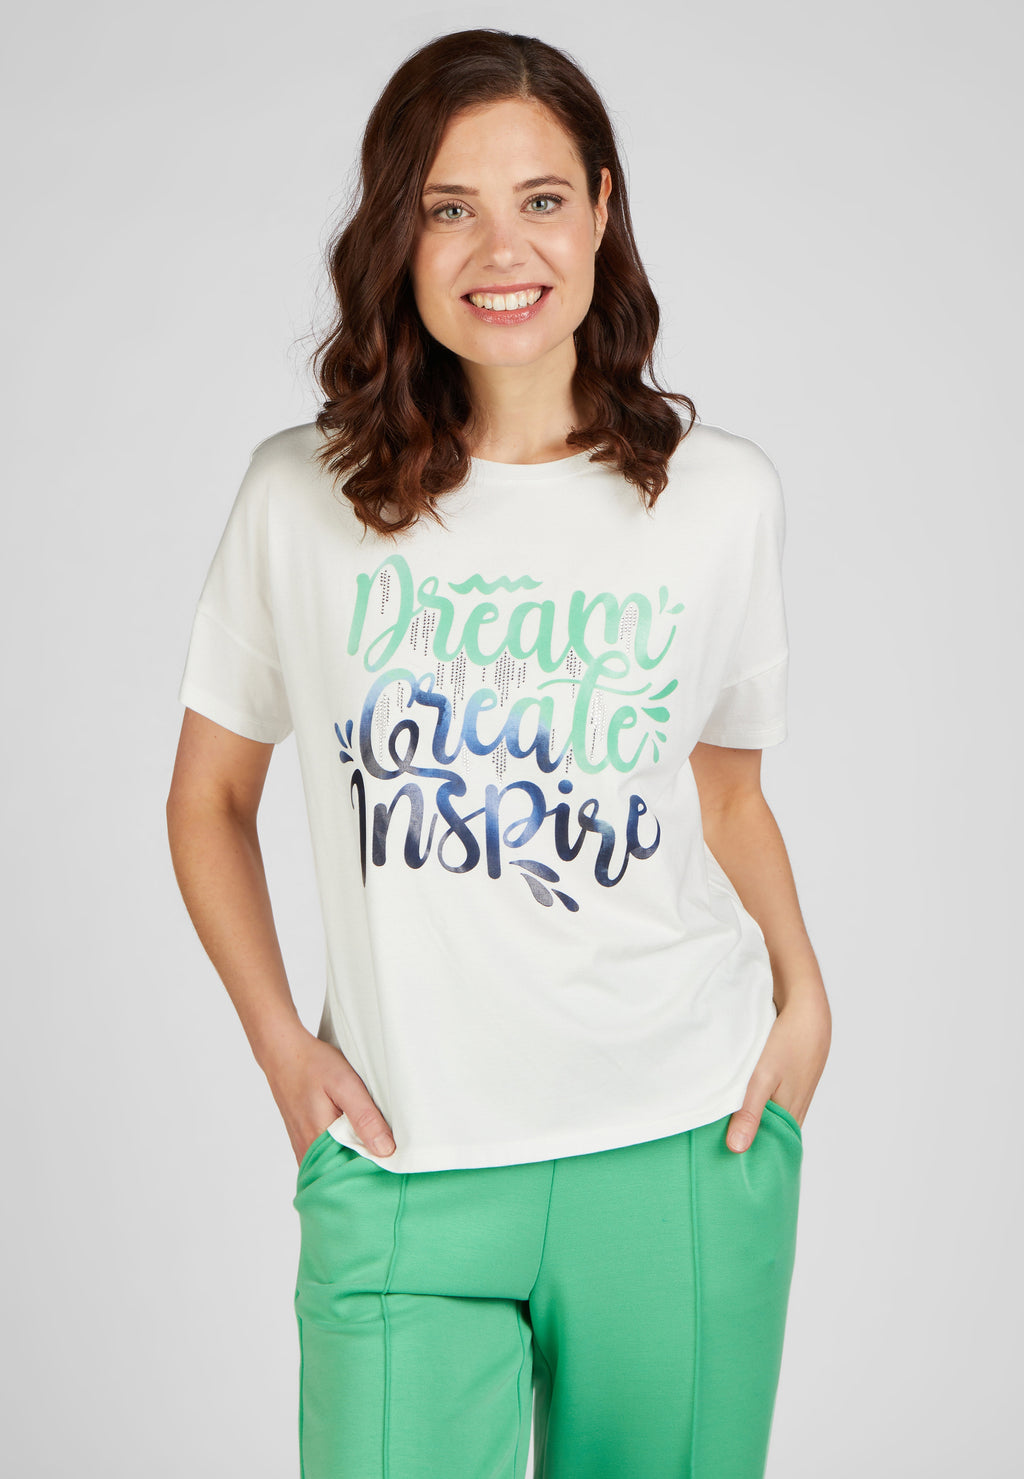 Rabe street cafe collection slogan printed tshirt in white with green, product code 52-214302